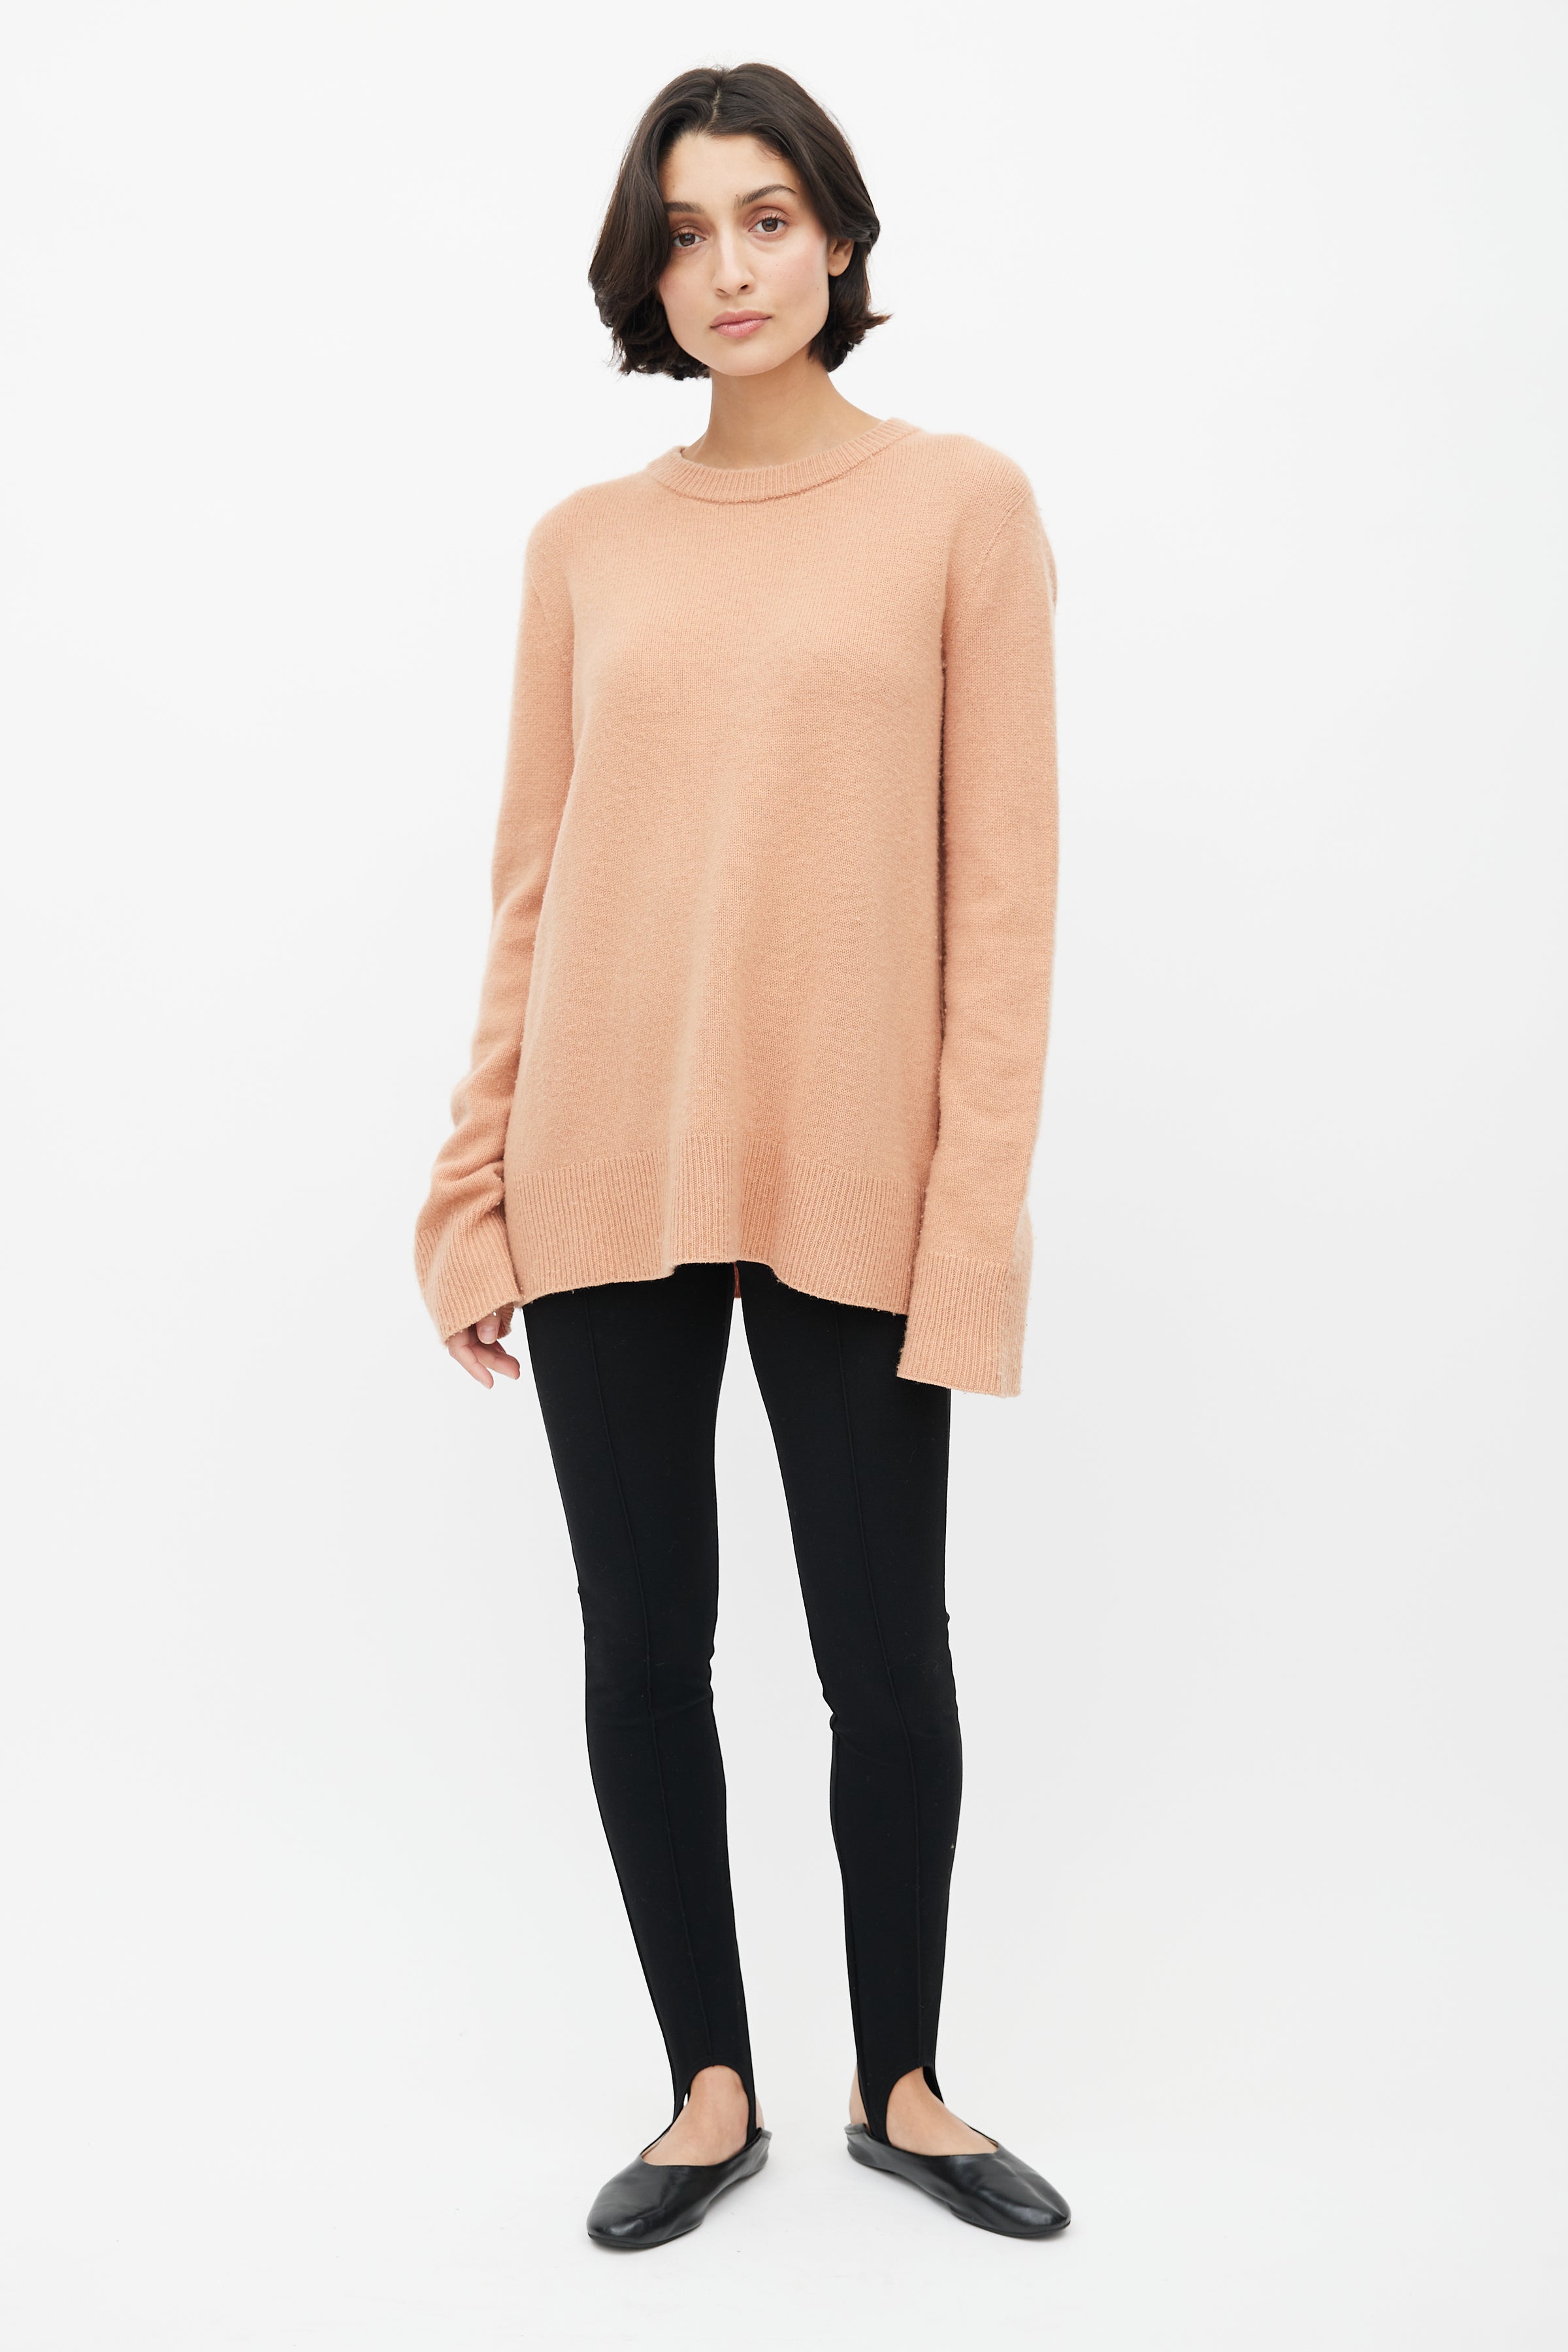 The Row // Beige Cashmere Knit Sweater – VSP Consignment